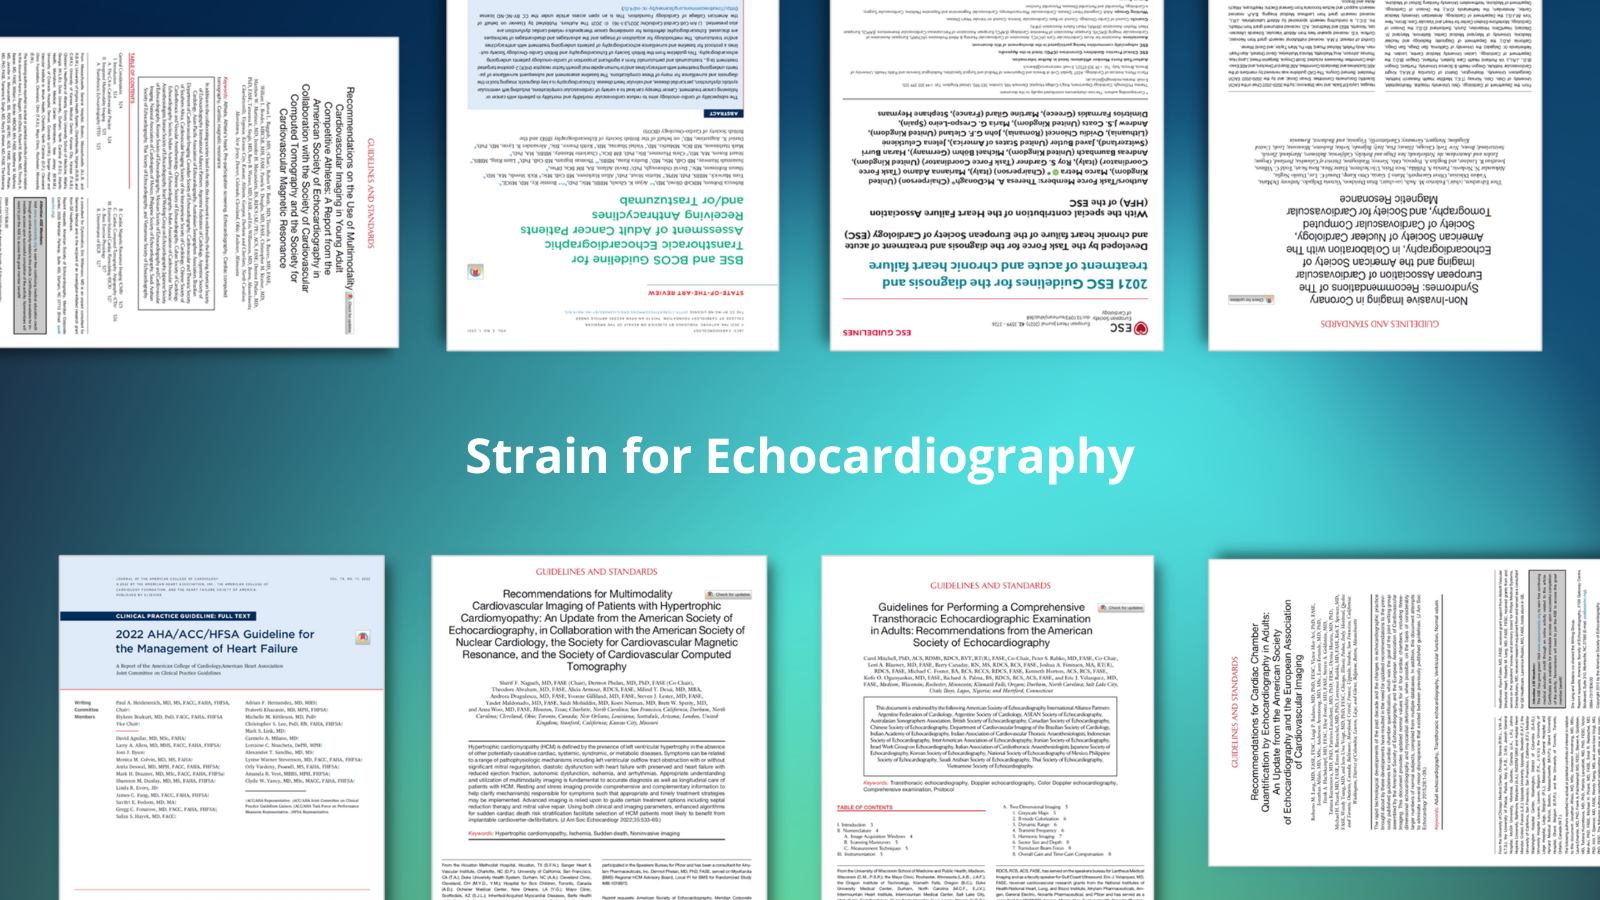 The value of strain in echocardiography: what the guidelines say - Ultromics